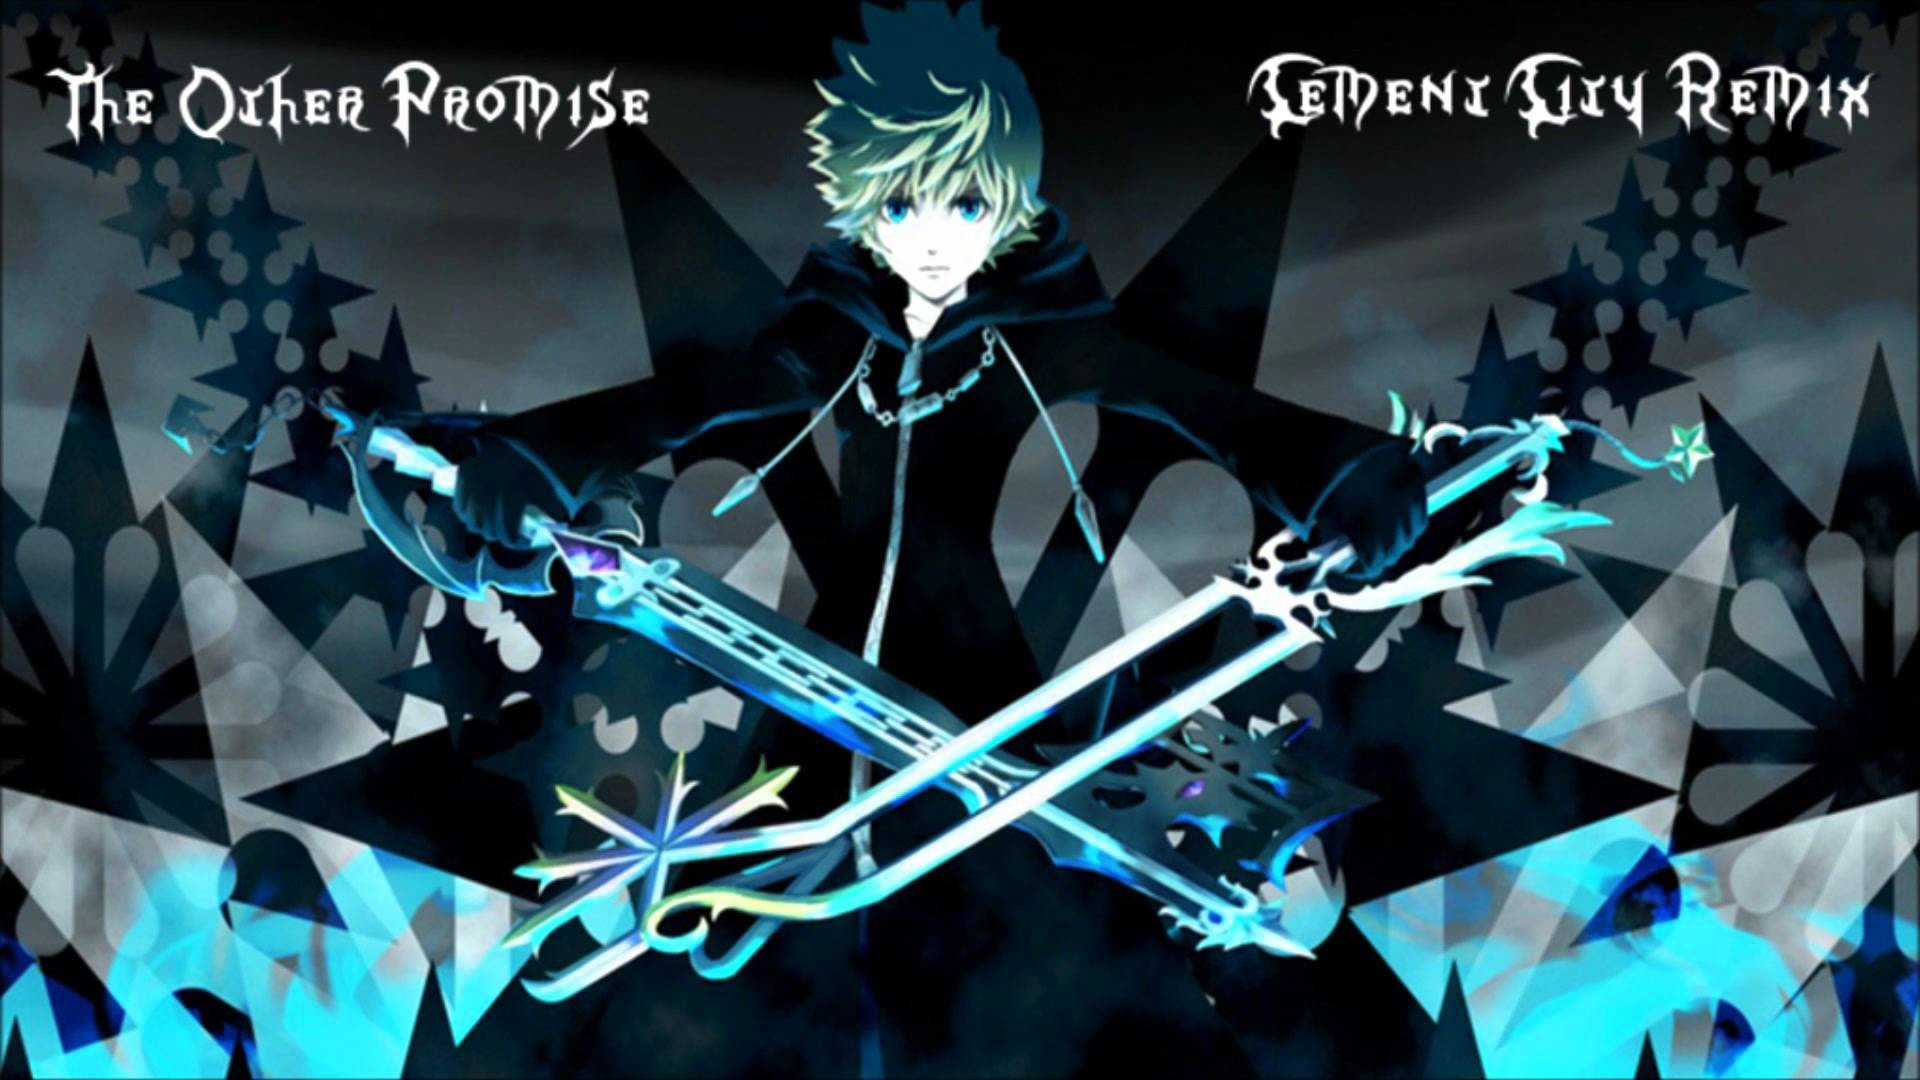 1920x1080 The Other Promise (Cement City Remix) [Roxas' battle theme from "Kingdom  Hearts"] - YouTube